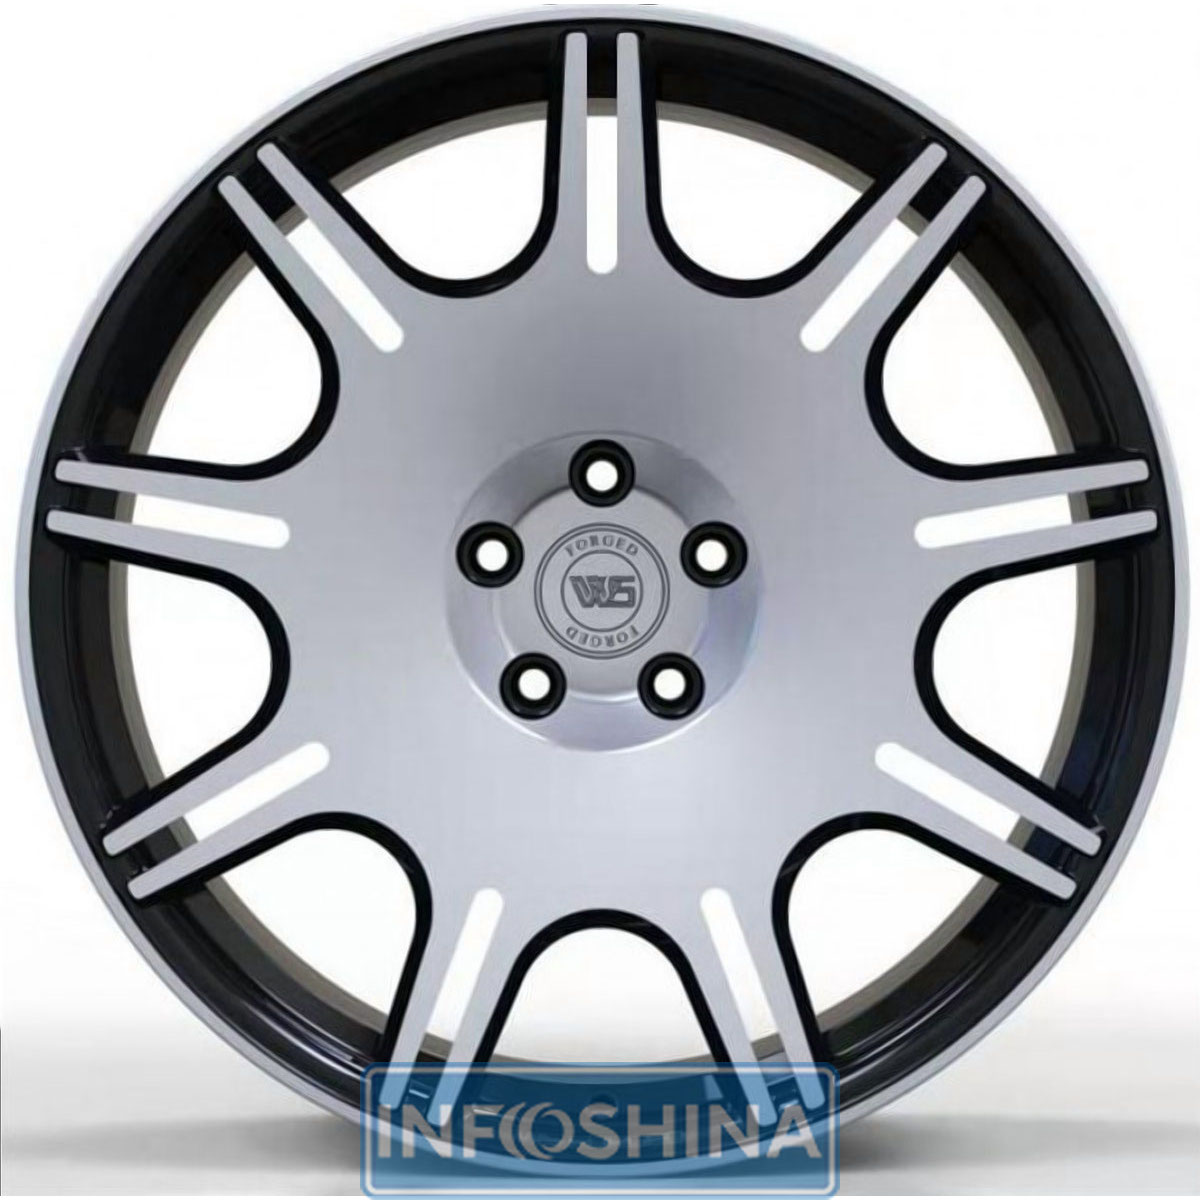 Купить диски WS Forged WS1249 Gloss Black With Machined Face R20 W9 PCD5x112 ET30 DIA66.6